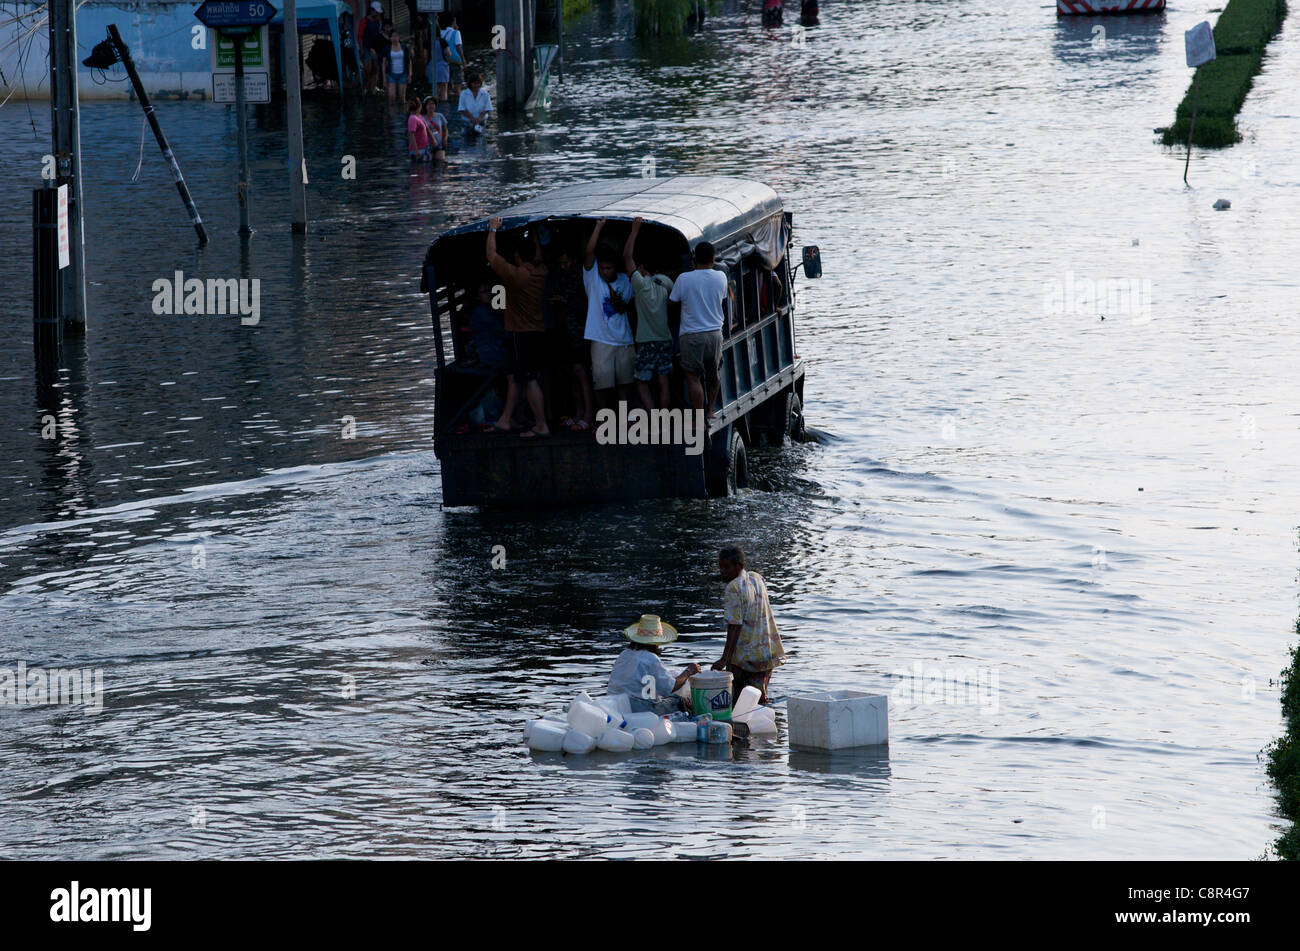 Bangkok residents flee flooding on Phahon Yothin Road, Bangkok, Thailand on Monday, October 31st, 2011. Thailand is experiencing its worst flooding in more than 50 years. Stock Photo